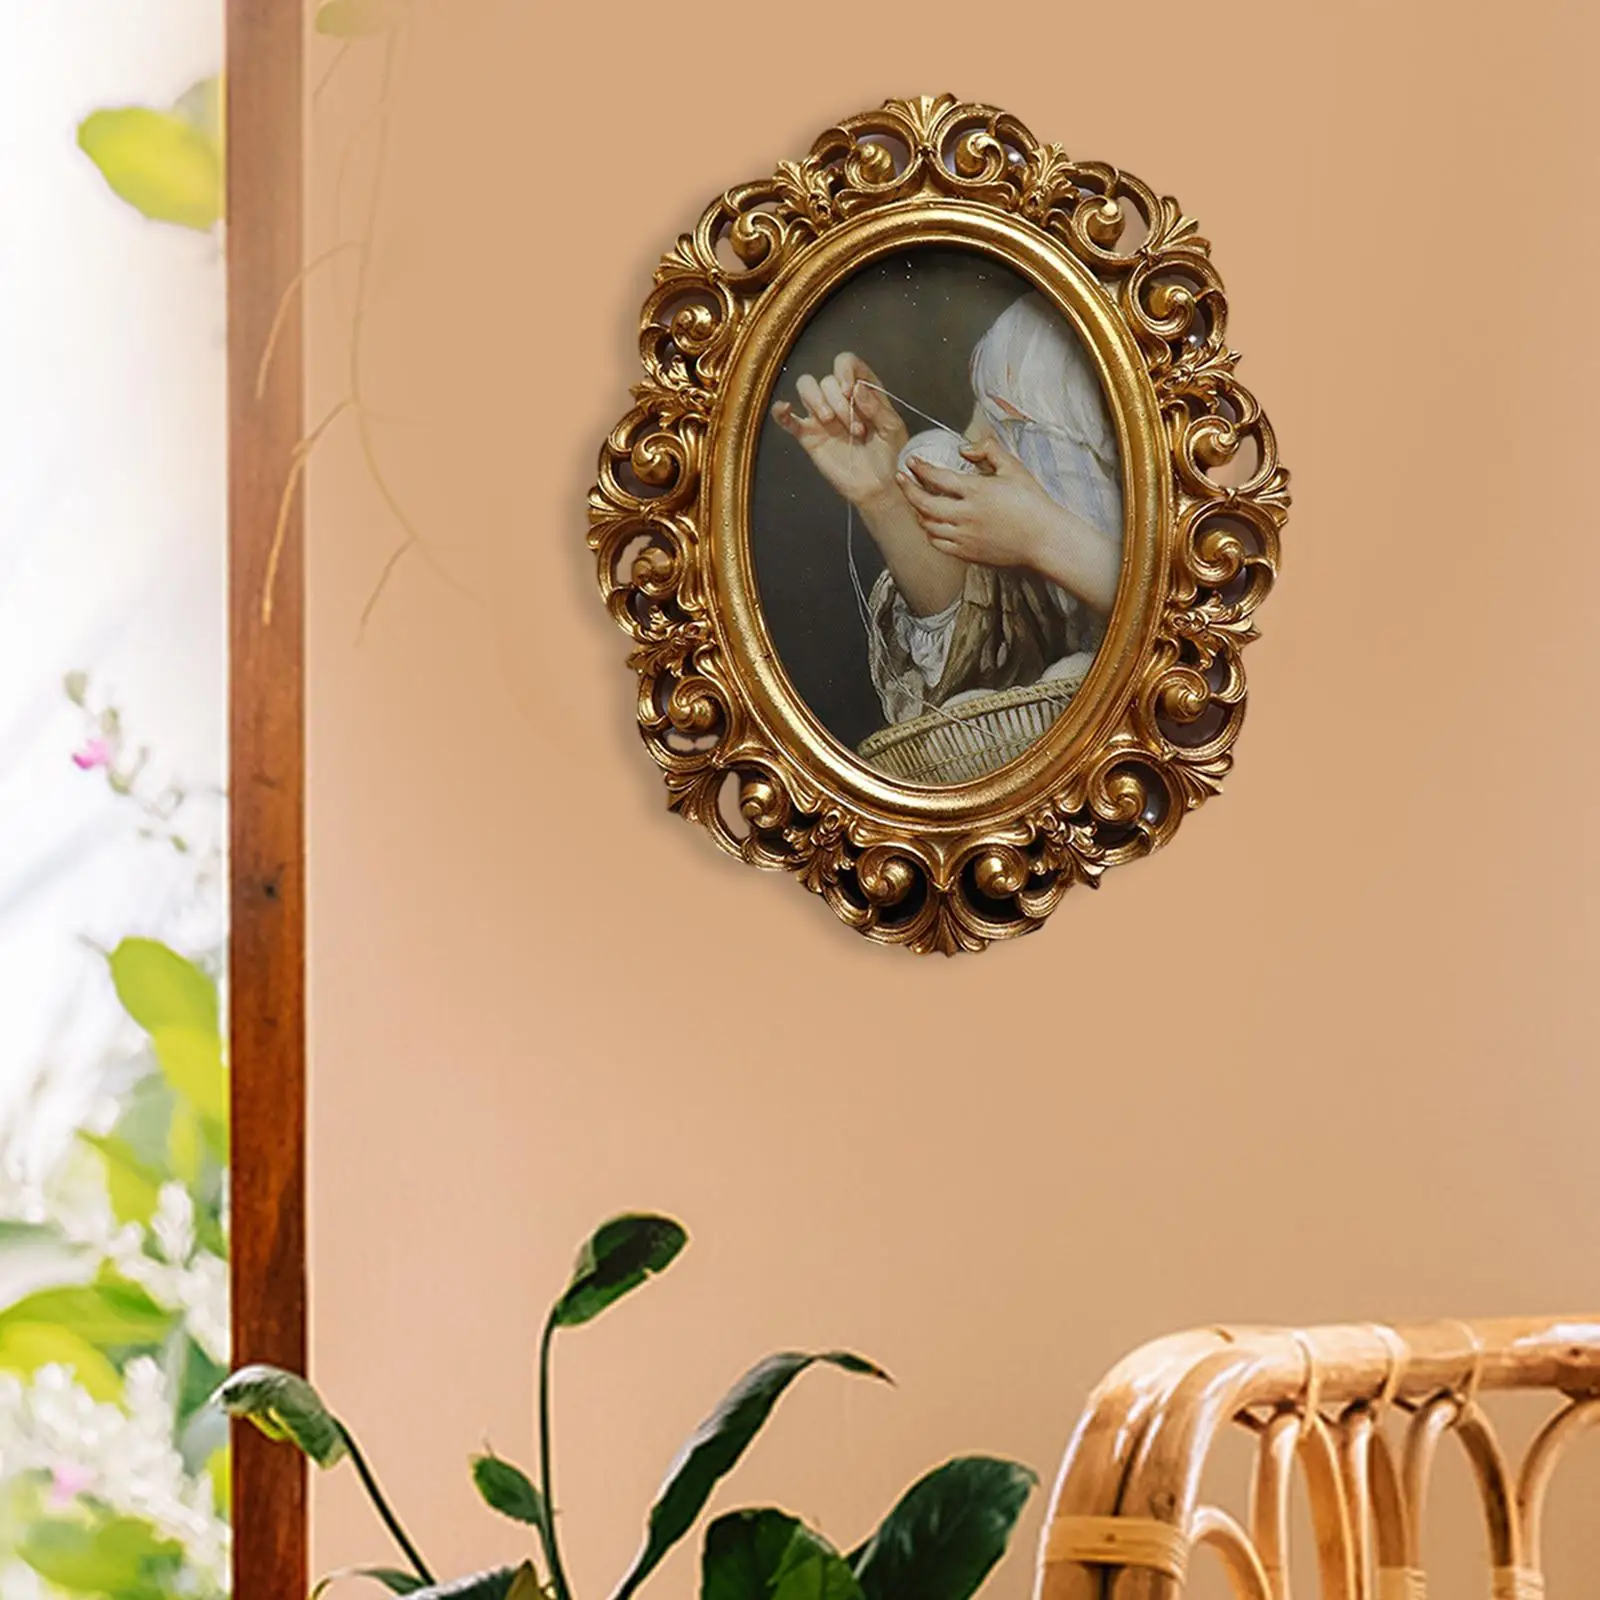 European Style Vintage Style Oval Polyresin Picture Frame Wall Mounting, Decor for Dining Room Office Photo Gallery Art Elegant images - 6